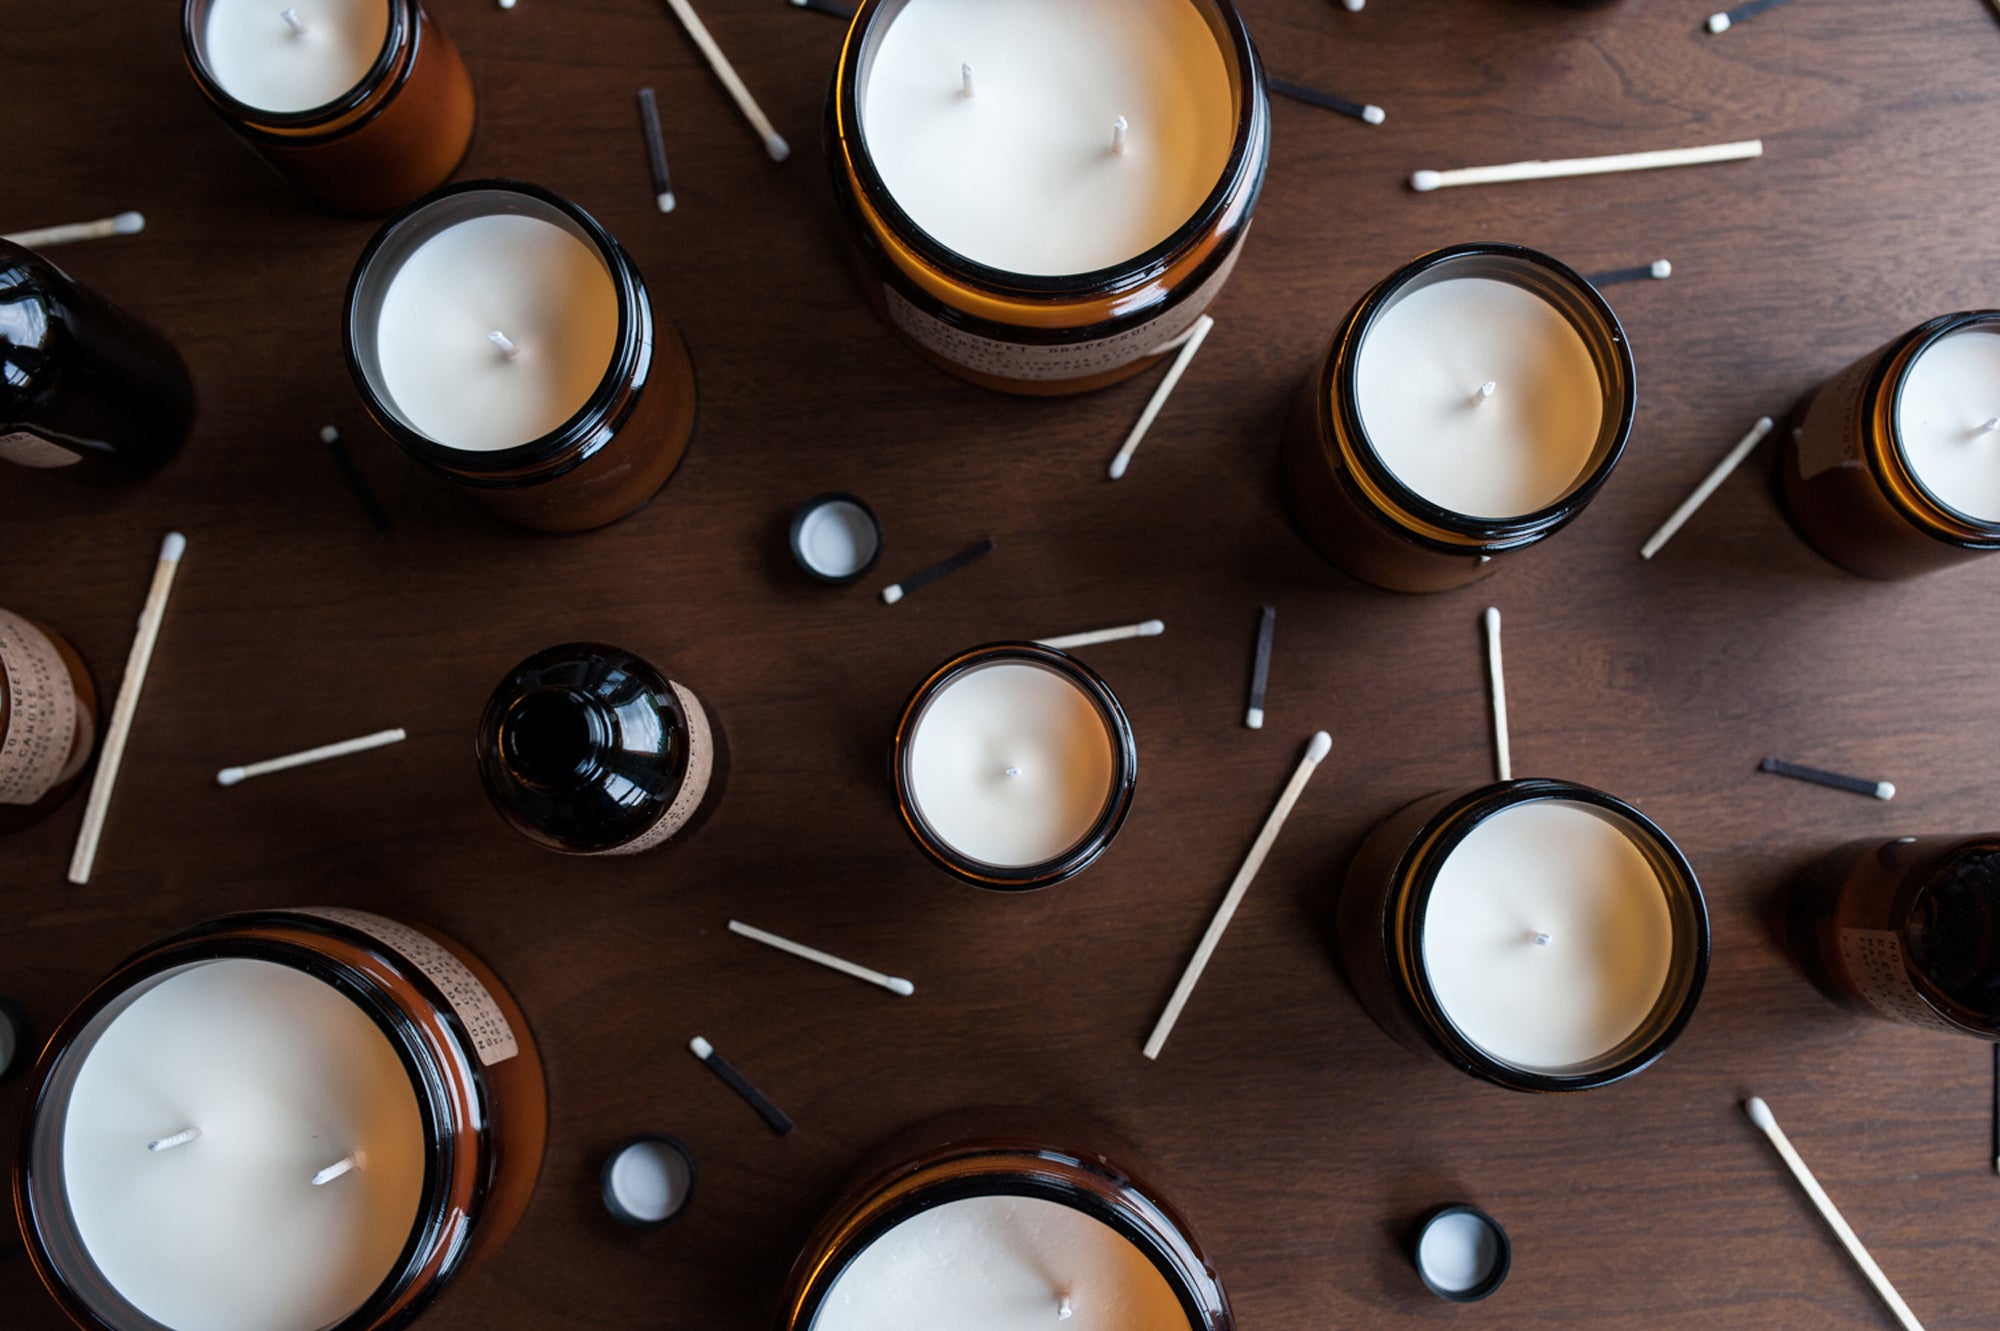 Top Down View of PF Candle Co's soy waxed candles showing the wax and wicks